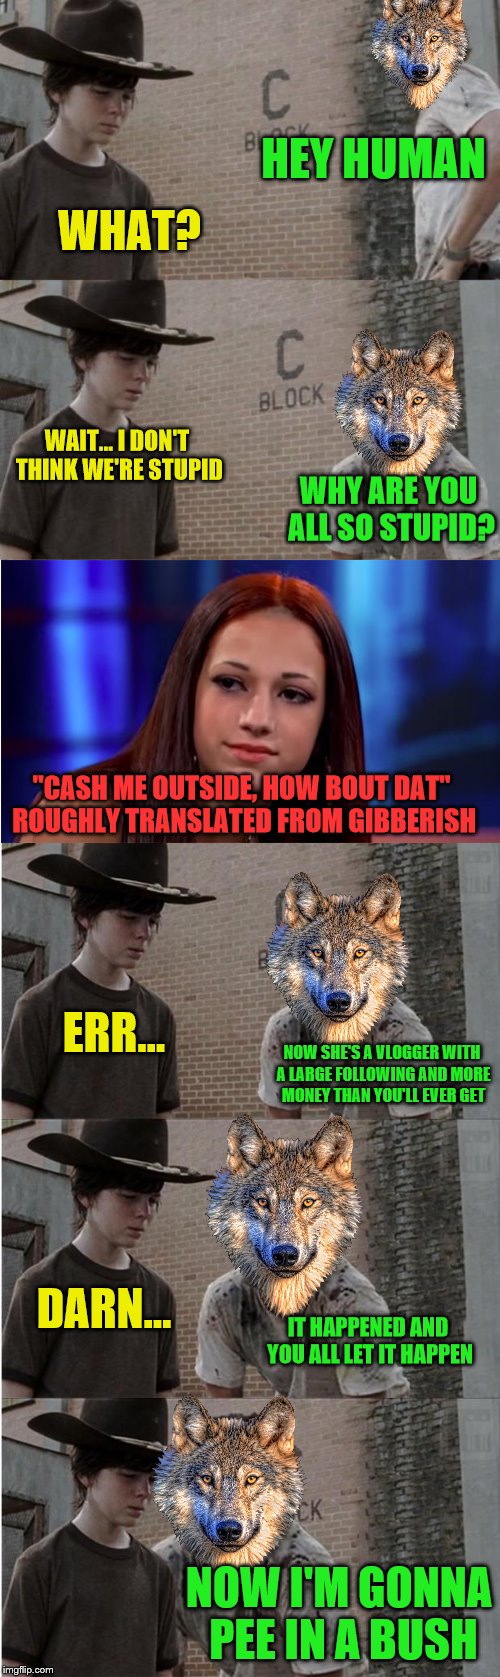 Human weekend- A Buggylememe weekend (12/05-13/05) |  HEY HUMAN; WHAT? WAIT... I DON'T THINK WE'RE STUPID; WHY ARE YOU ALL SO STUPID? "CASH ME OUTSIDE, HOW BOUT DAT" ROUGHLY TRANSLATED FROM GIBBERISH; ERR... NOW SHE'S A VLOGGER WITH A LARGE FOLLOWING AND MORE MONEY THAN YOU'LL EVER GET; DARN... IT HAPPENED AND YOU ALL LET IT HAPPEN; NOW I'M GONNA PEE IN A BUSH | image tagged in memes,rick and carl longer,human weekend,wolf,danielle bregoli,stupid | made w/ Imgflip meme maker